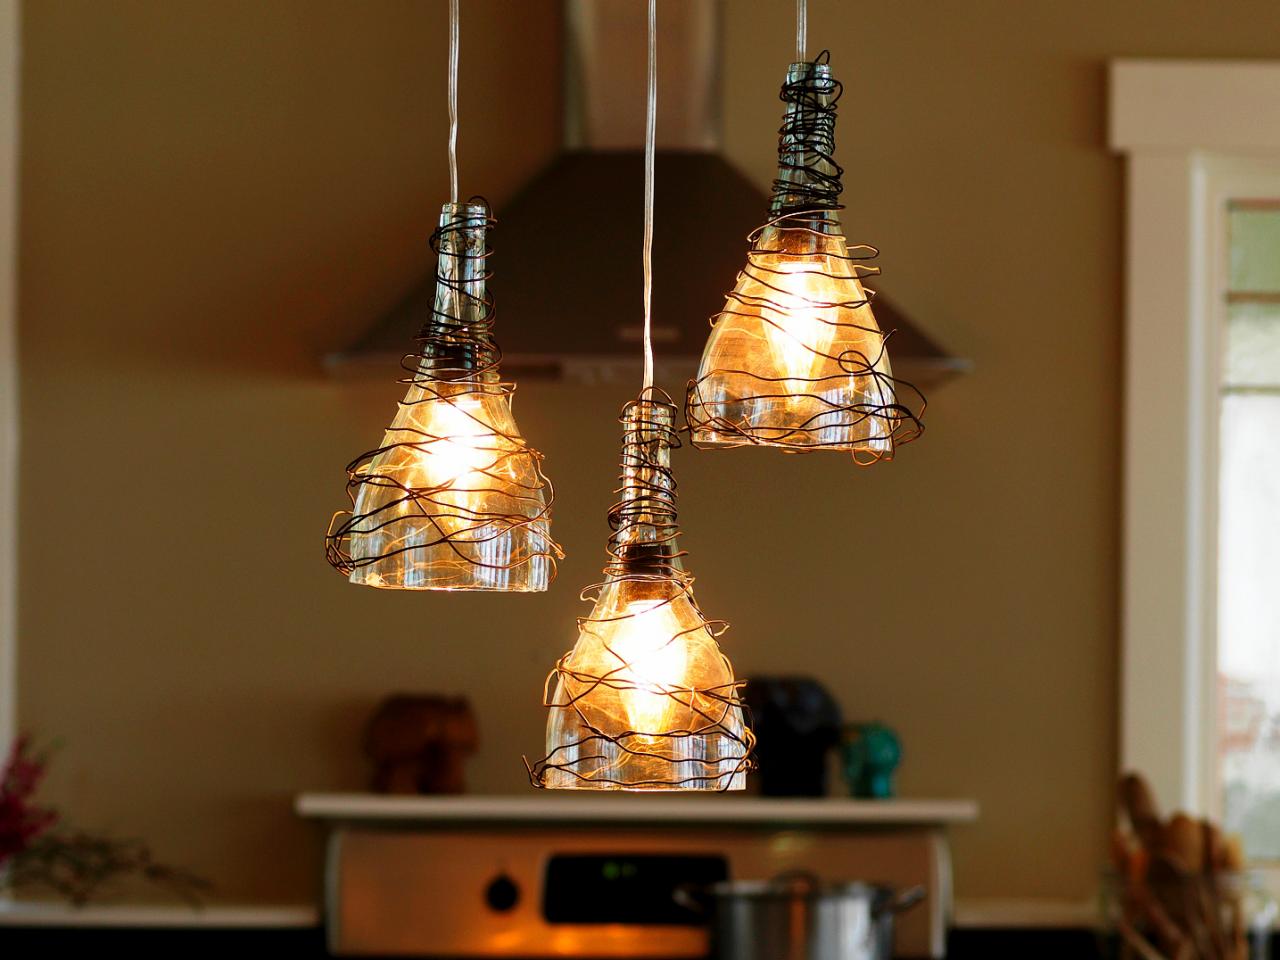 12 Awesome DIY Light Fixtures from Upcycled Items